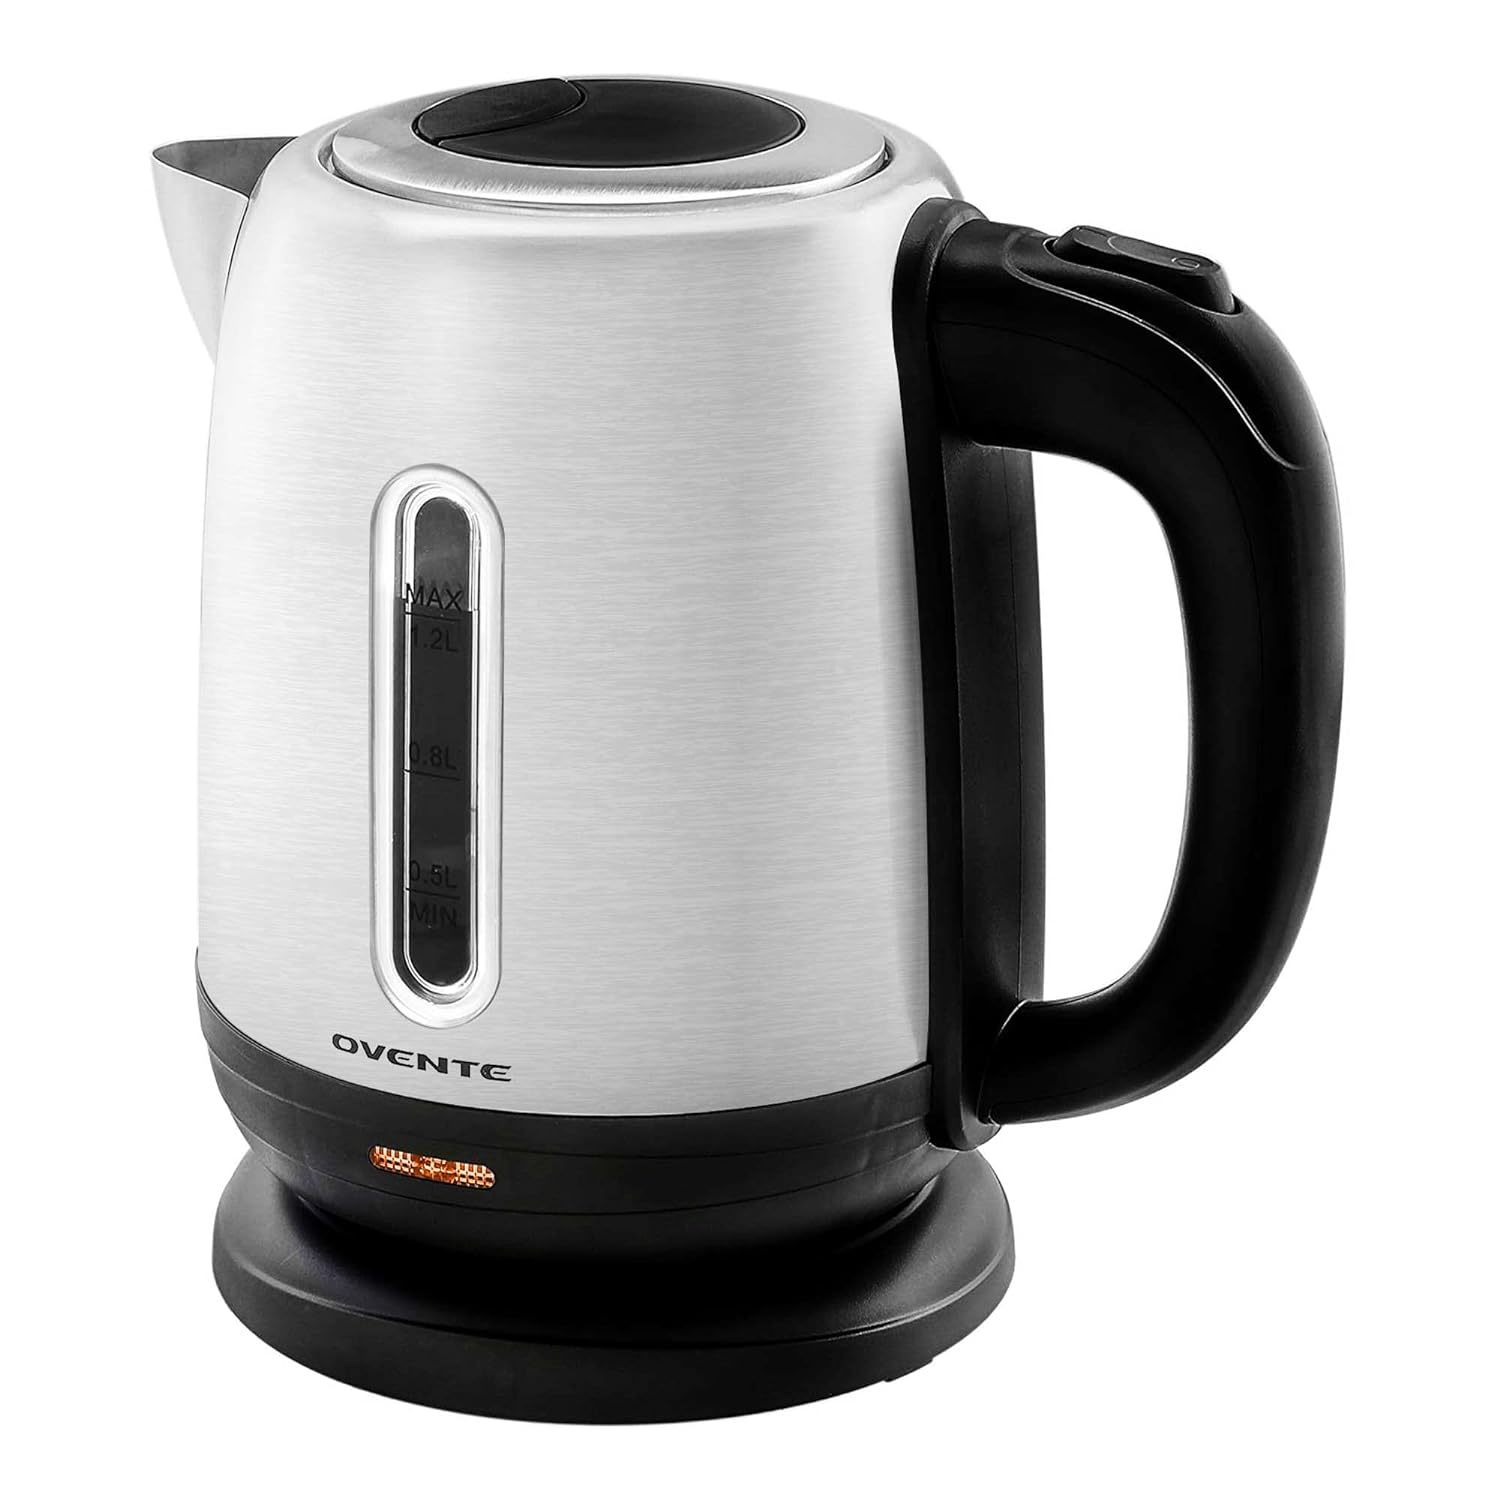 Ovente Electric Tea Kettle Stainless Steel 1.2 Liter Portable Instant Hot Water  - $64.59